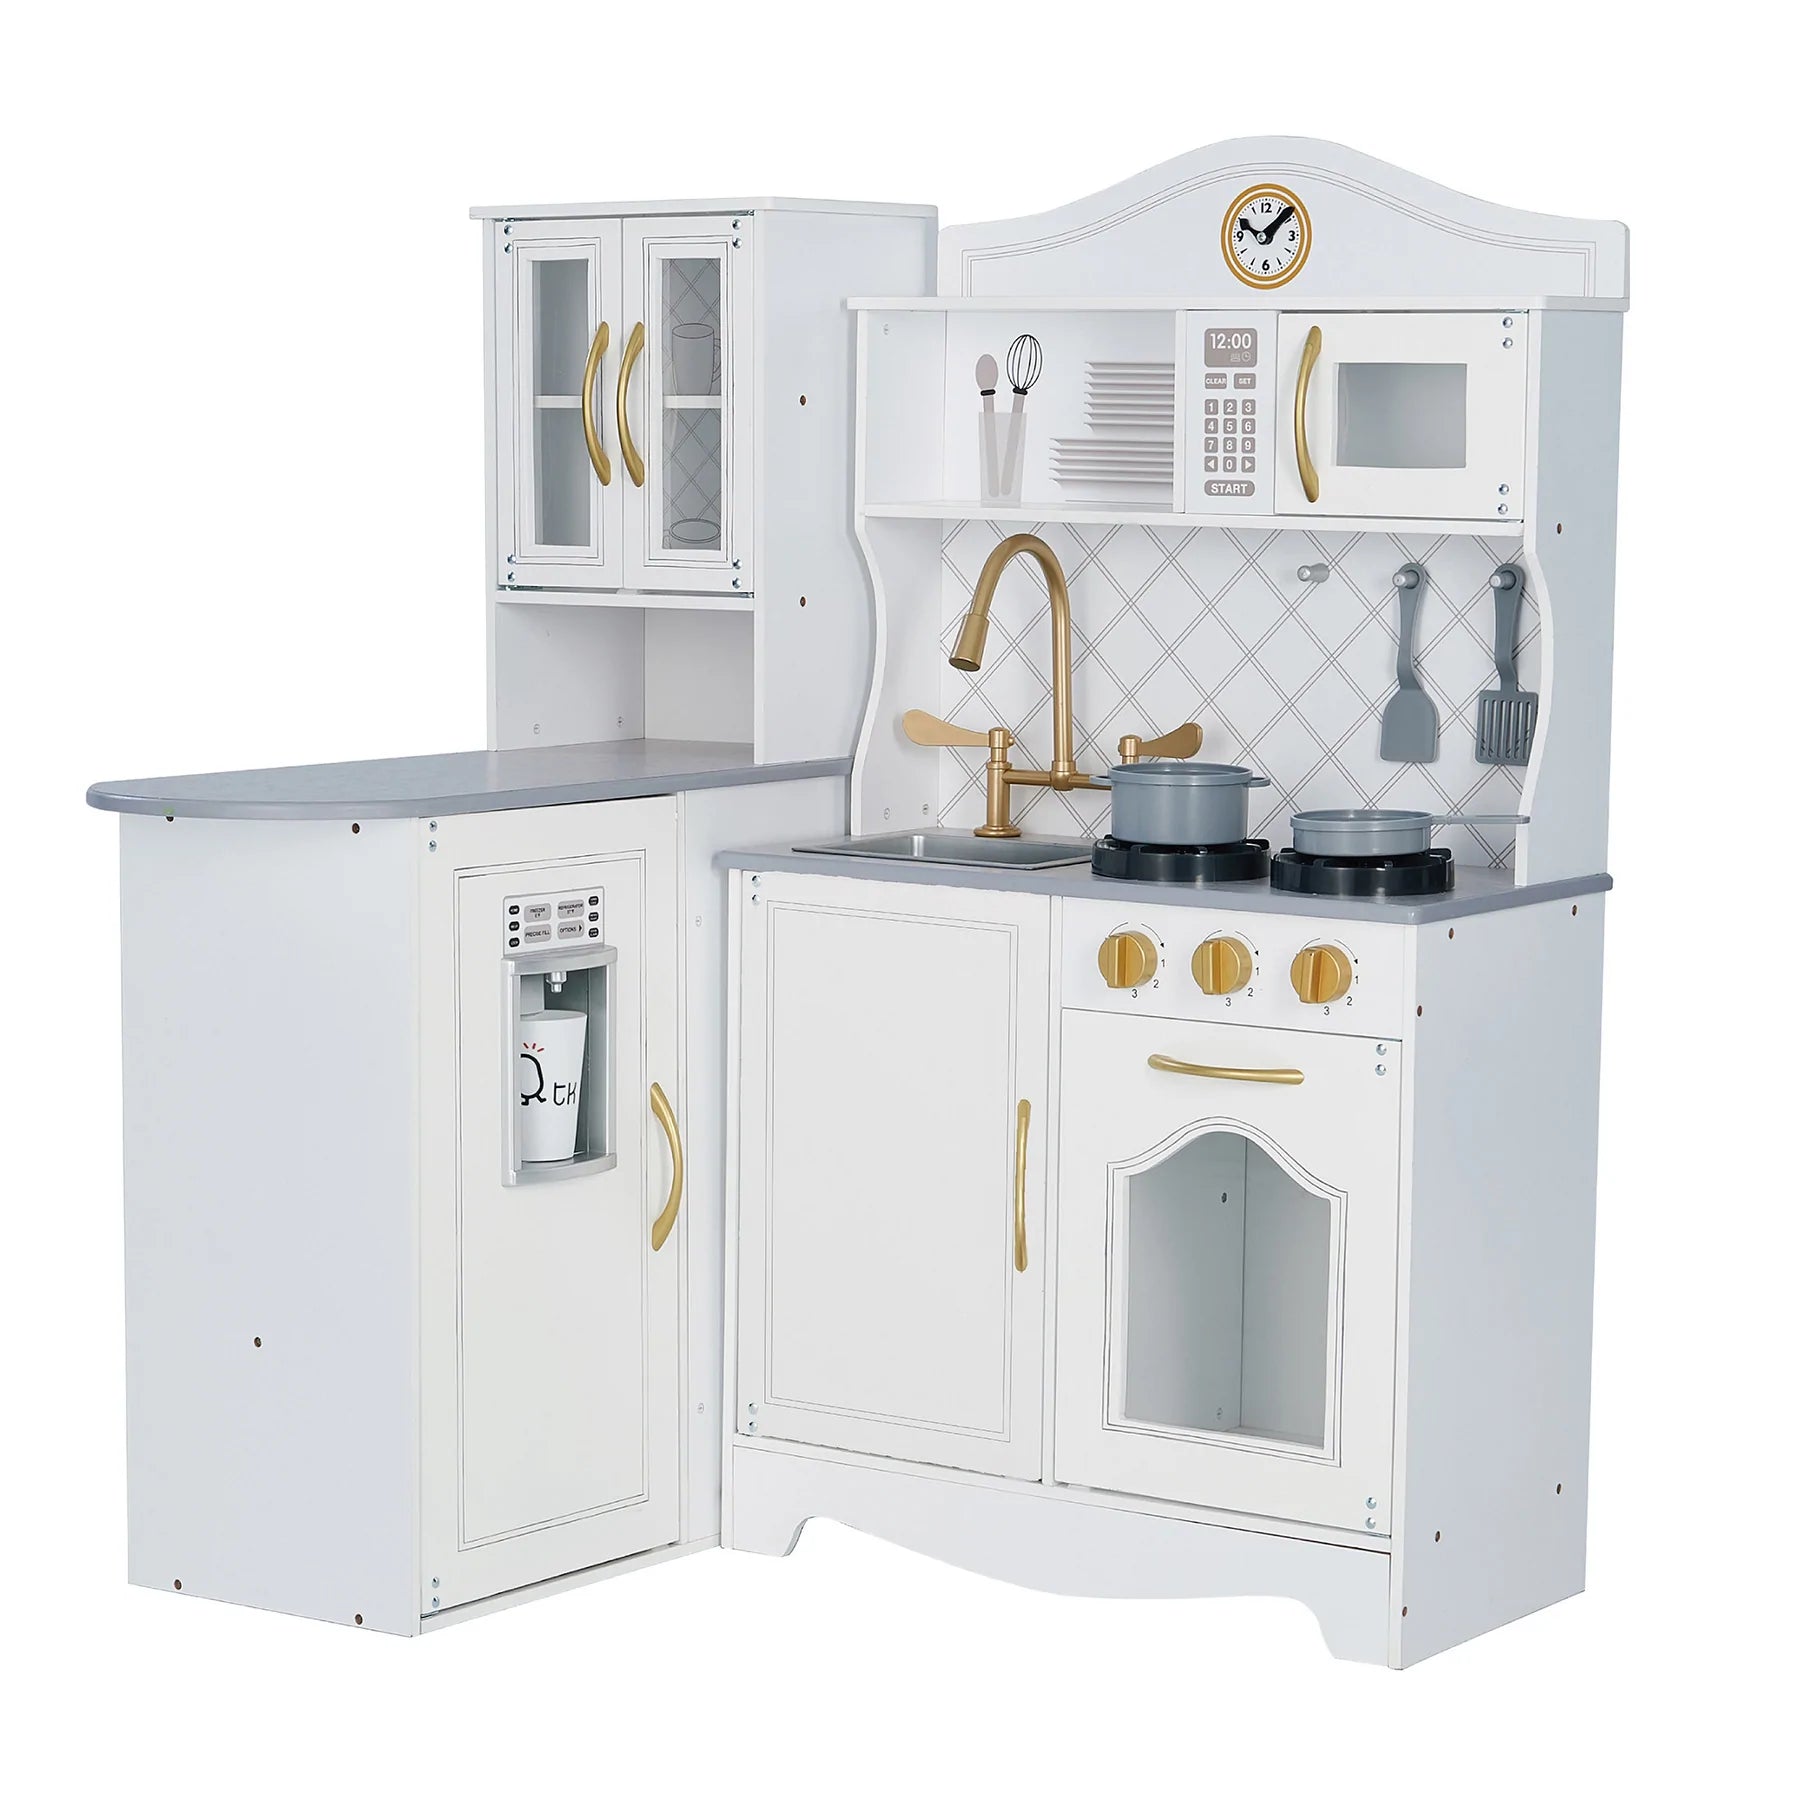 Teamson Kids - Biscay Delight Classic Play Kitchen - Mint